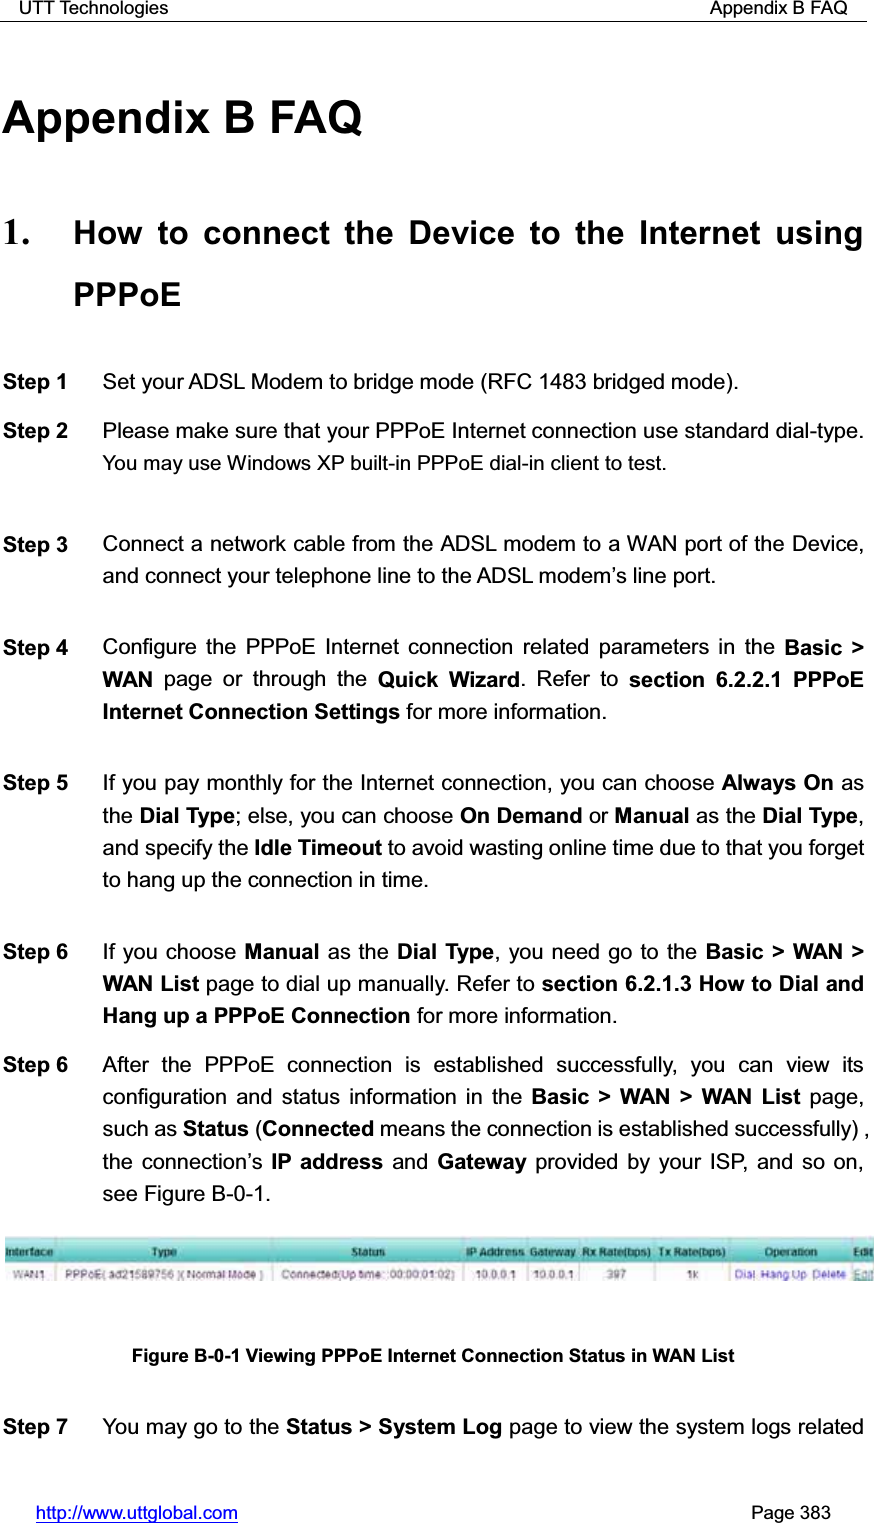 UTT Technologies                                                          Appendix B FAQ http://www.uttglobal.com                                                       Page 383 Appendix B FAQ 1. How to connect the Device to the Internet using PPPoEStep 1  Set your ADSL Modem to bridge mode (RFC 1483 bridged mode). Step 2  Please make sure that your PPPoE Internet connection use standard dial-type. You may use Windows XP built-in PPPoE dial-in client to test.Step 3  Connect a network cable from the ADSL modem to a WAN port of the Device, and connect your telephone line to the ADSL modem¶s line port. Step 4  Configure the PPPoE Internet connection related parameters in the Basic &gt; WAN page or through the Quick Wizard. Refer to section 6.2.2.1 PPPoE Internet Connection Settings for more information. Step 5  If you pay monthly for the Internet connection, you can choose Always On as the Dial Type; else, you can choose On Demand or Manual as the Dial Type,and specify the Idle Timeout to avoid wasting online time due to that you forget to hang up the connection in time.   Step 6  If you choose Manual as the Dial Type, you need go to the Basic &gt; WAN &gt; WAN List page to dial up manually. Refer to section 6.2.1.3 How to Dial and Hang up a PPPoE Connection for more information. Step 6  After the PPPoE connection is established successfully, you can view its configuration and status information in the Basic &gt; WAN &gt; WAN List page, such as Status (Connected means the connection is established successfully) , the connection¶sIP address and Gateway provided by your ISP, and so on, see Figure B-0-1. Figure B-0-1 Viewing PPPoE Internet Connection Status in WAN List Step 7  You may go to the Status &gt; System Log page to view the system logs related 